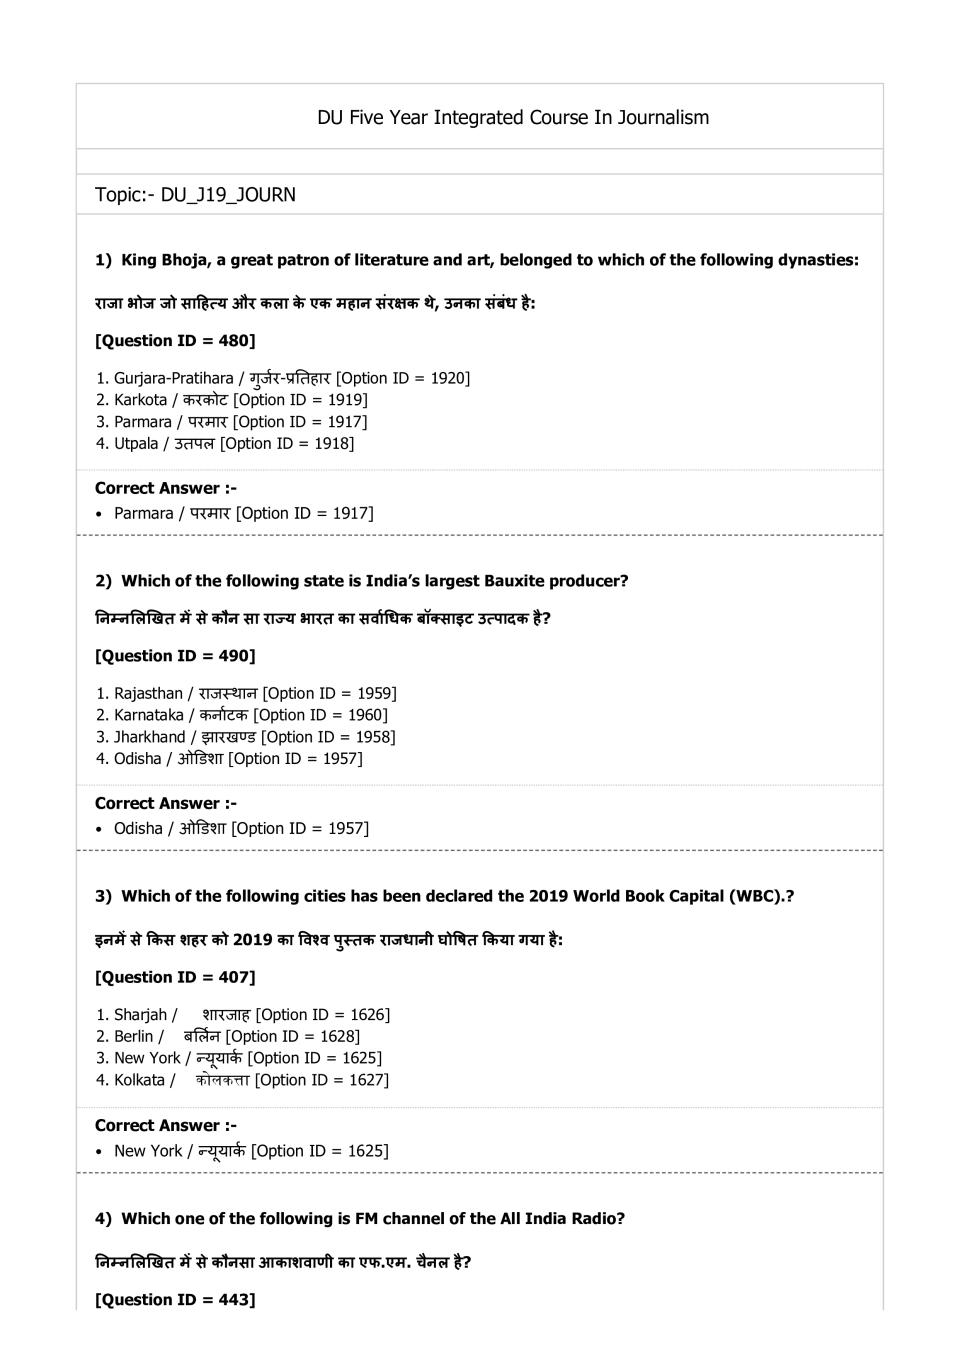 DUET Question Paper 2019 for Journalism (Integrated Course) - Page 1